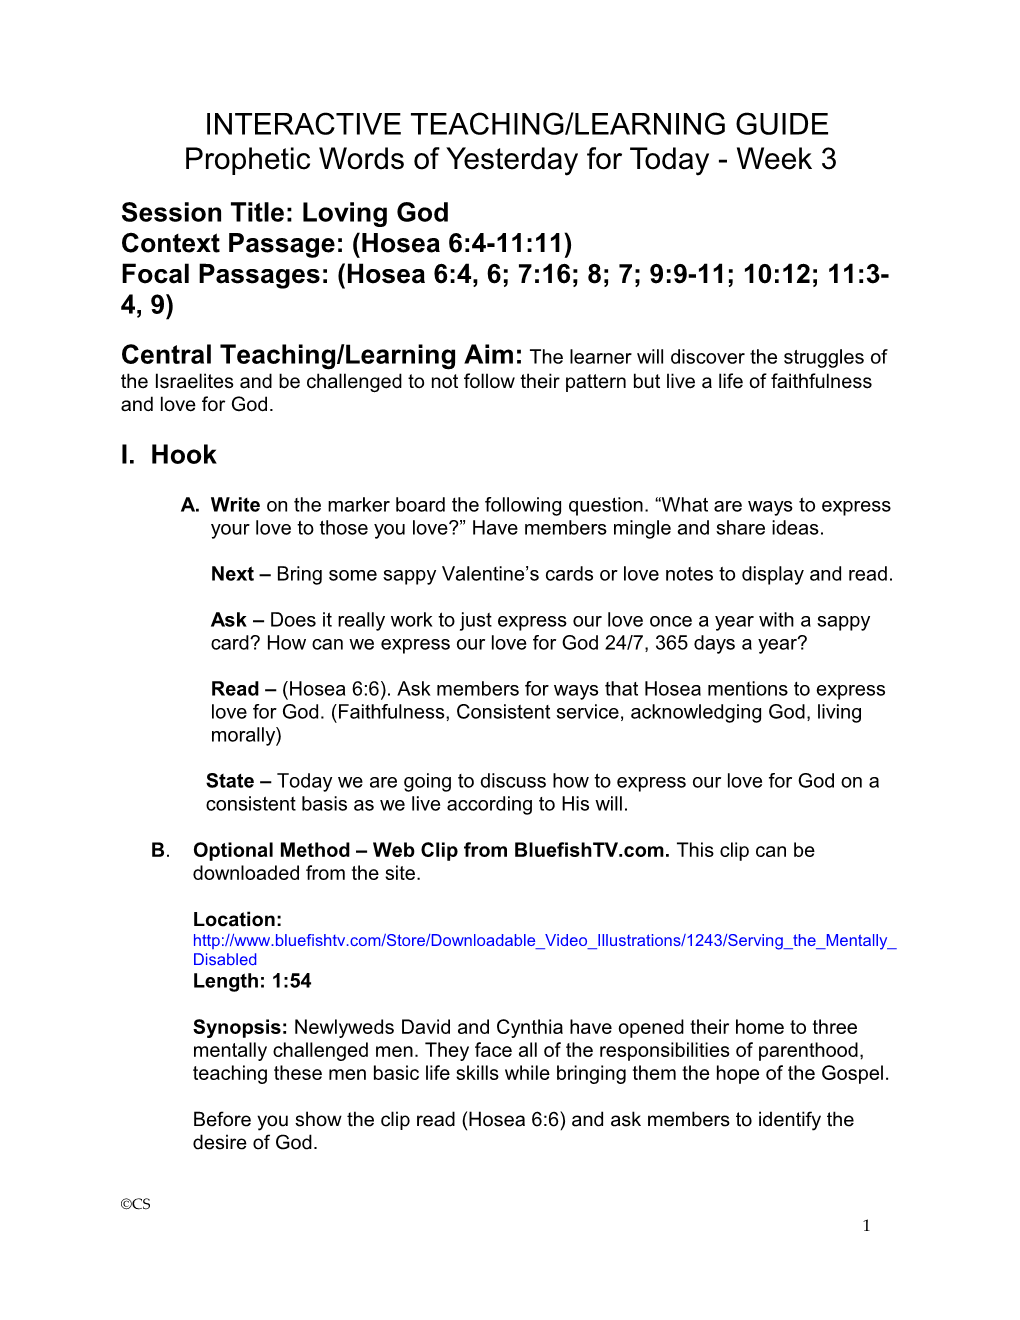 Interactive Teaching/Learning Guide s1